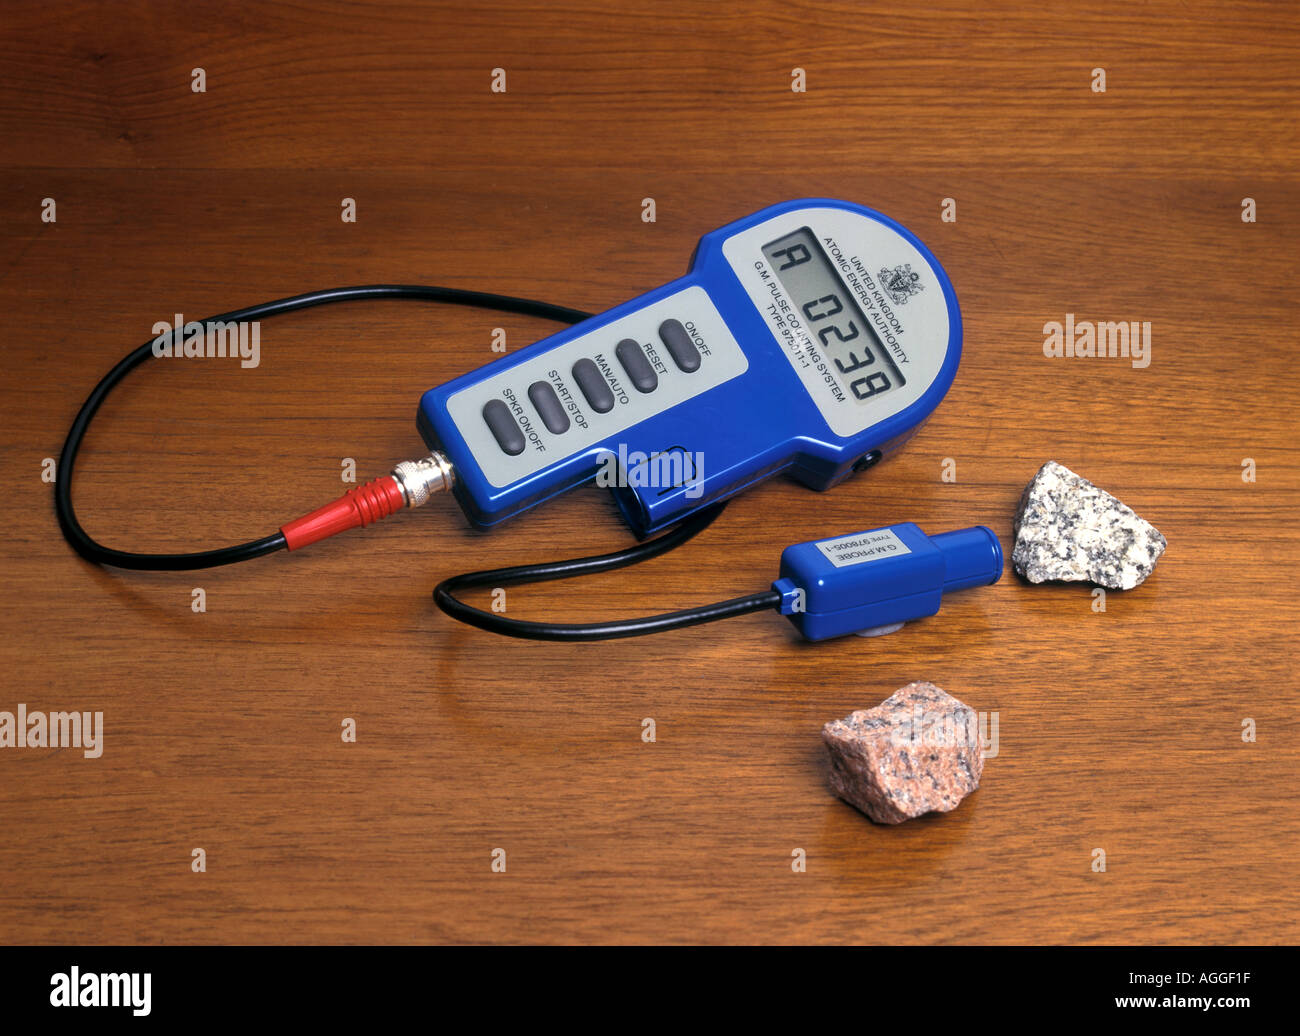 measuring radioactivity of a rock sample with a geiger counter Stock Photo